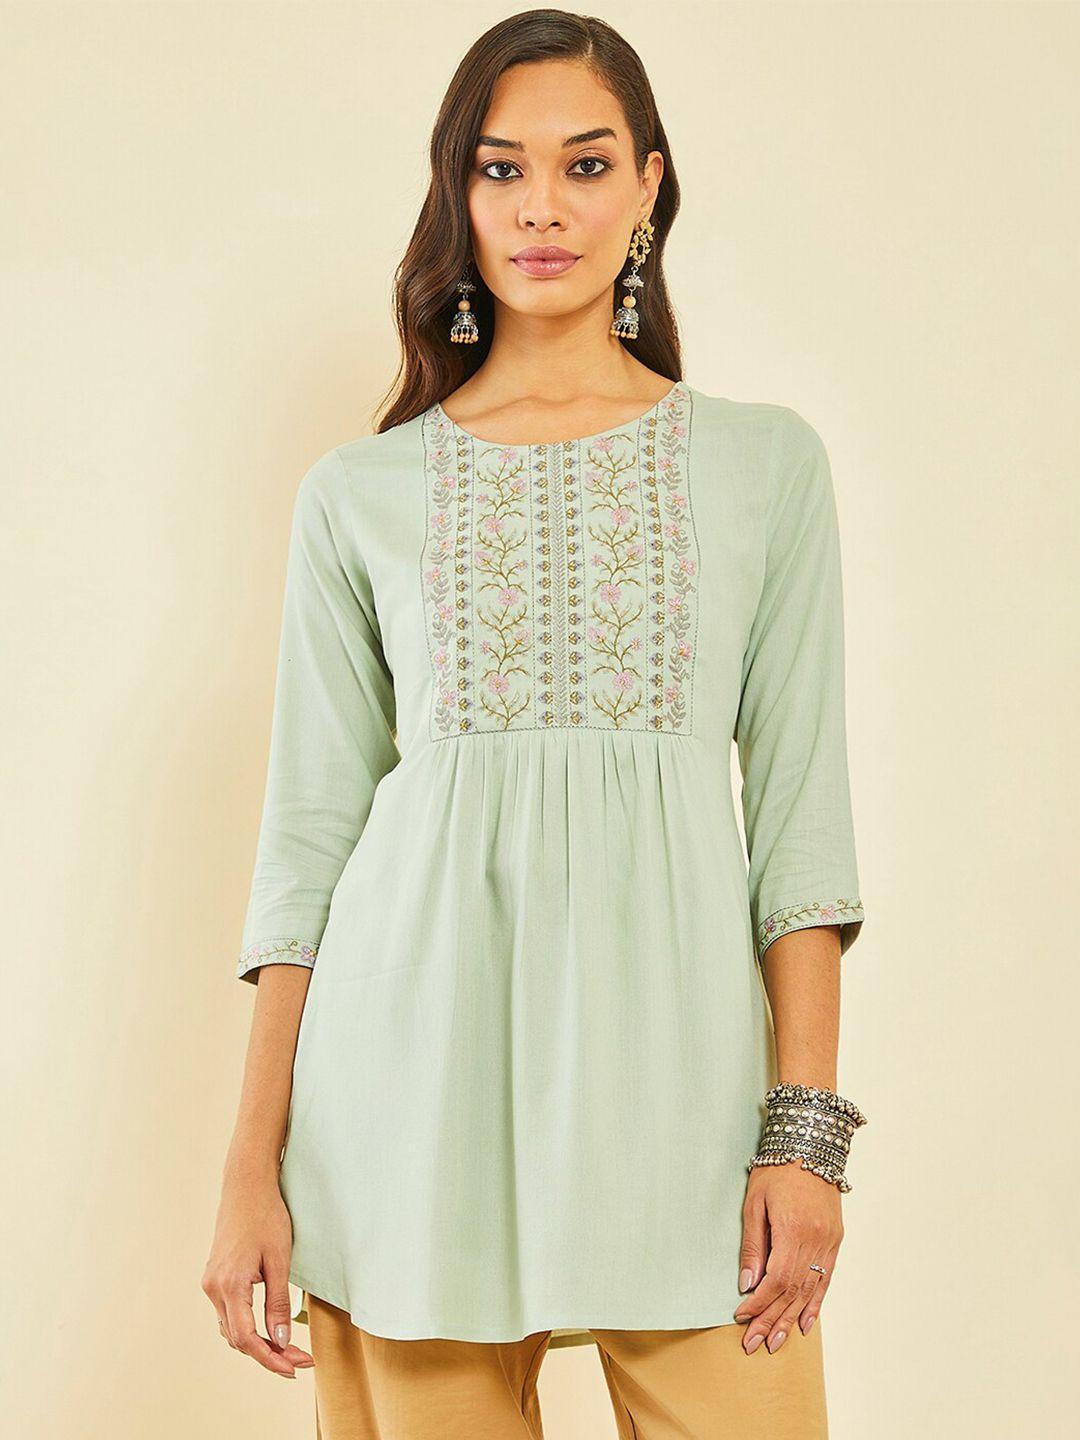 soch floral embroidered gathers tunic